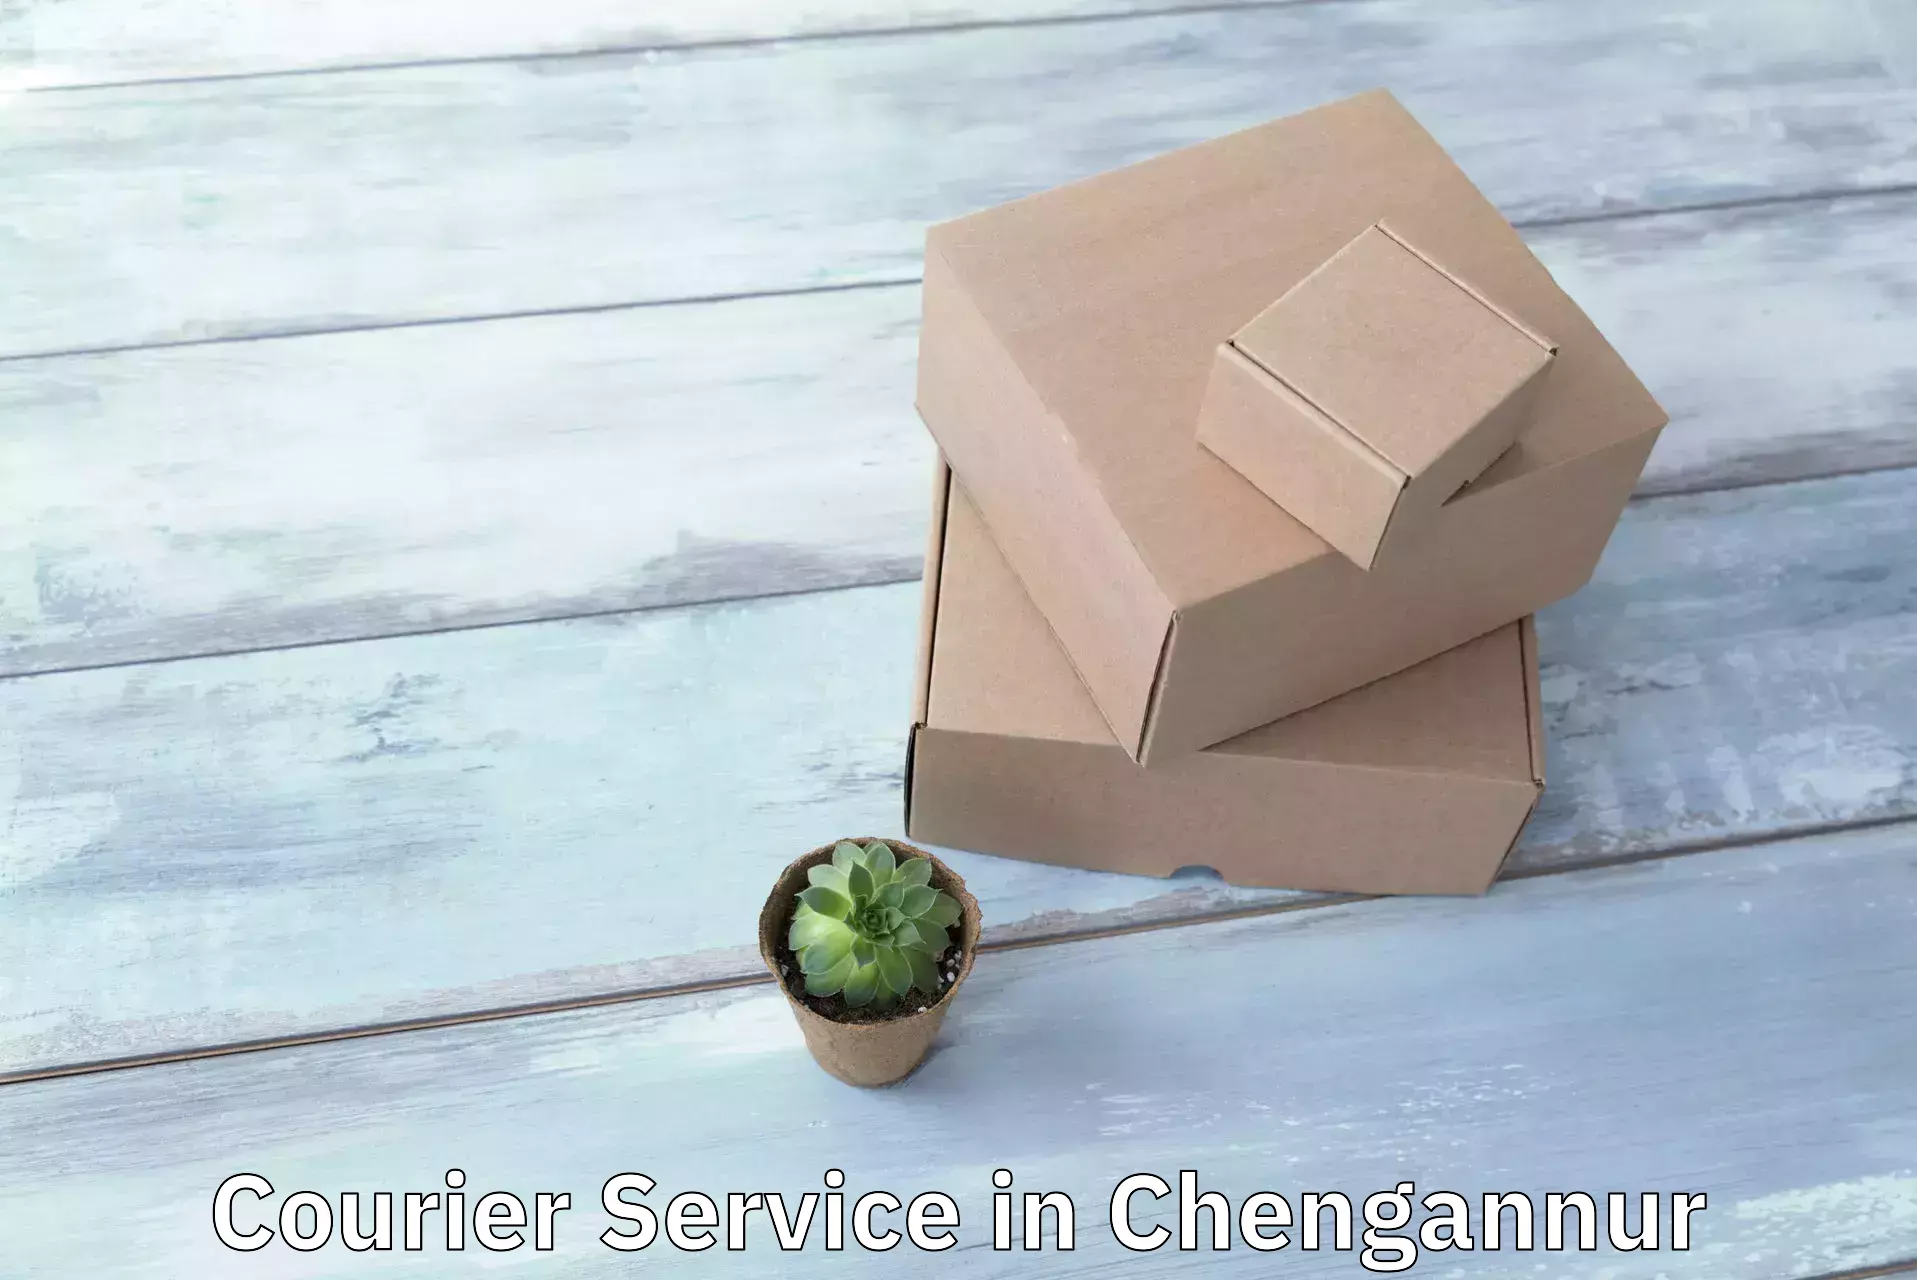 Express package delivery in Chengannur